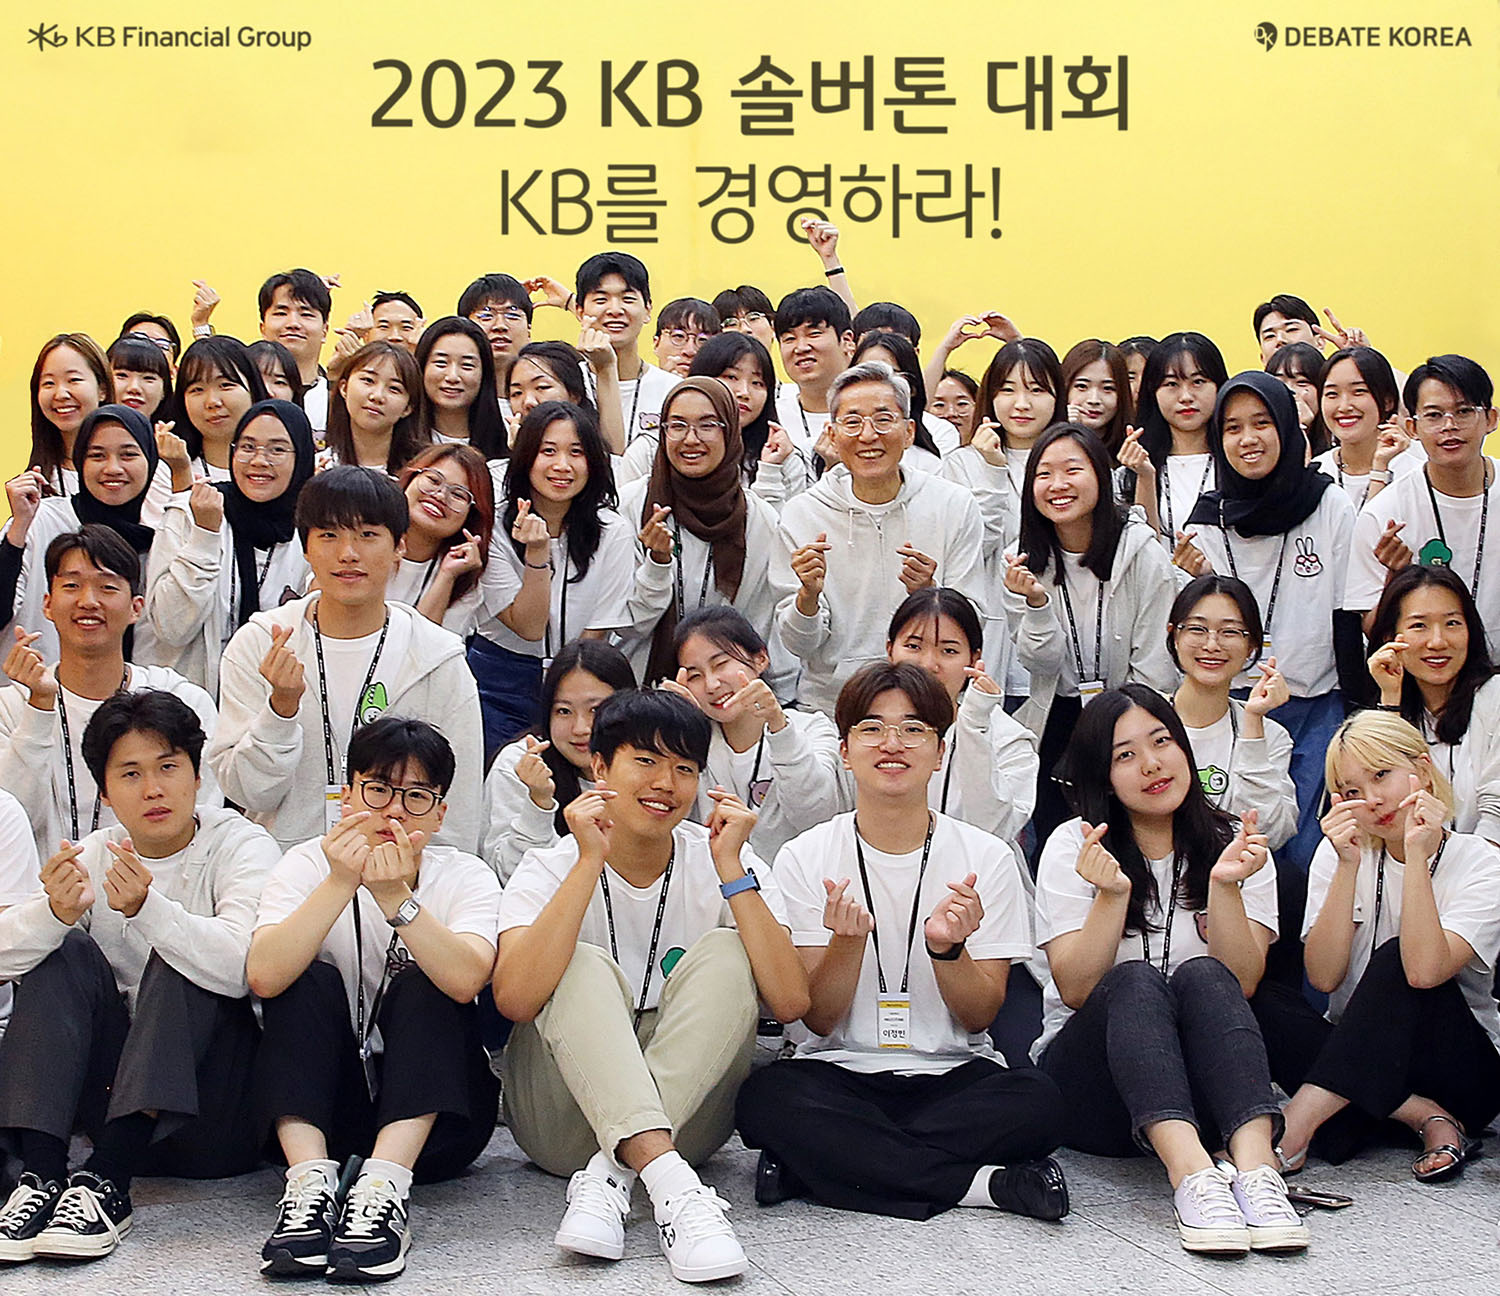 The image of the '2023 KB Solveathon Korea and Indonesia' event